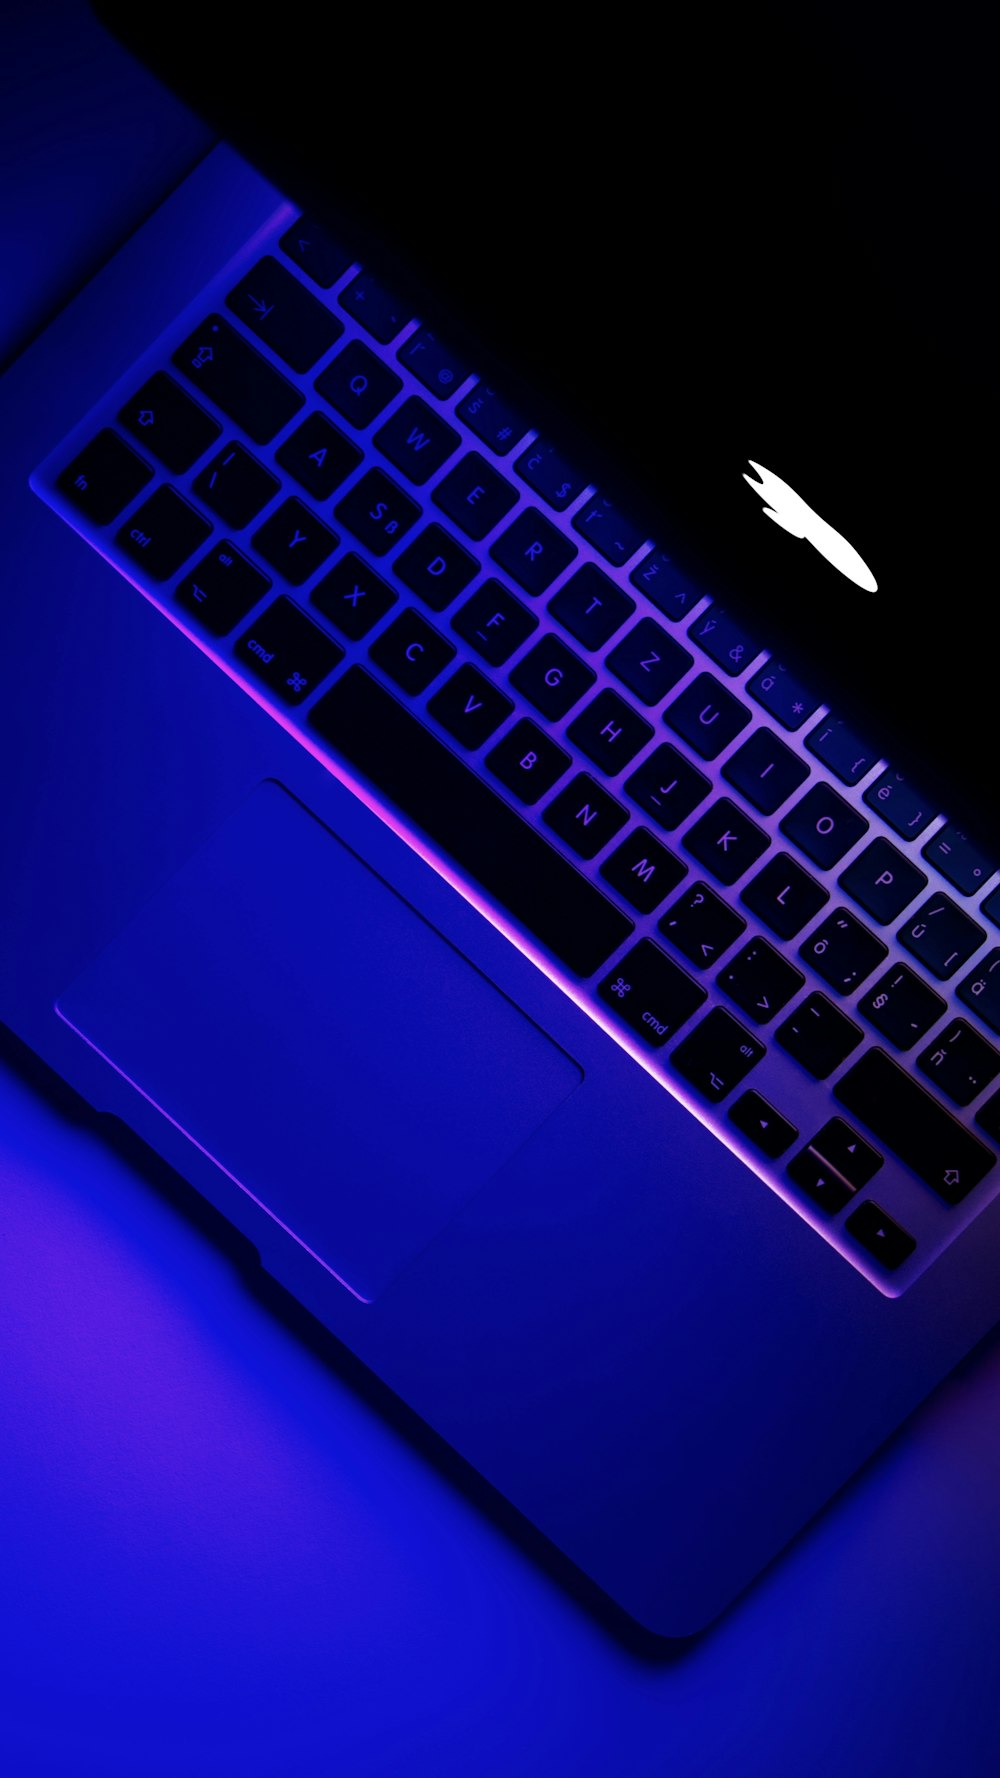 a close up of a laptop computer keyboard